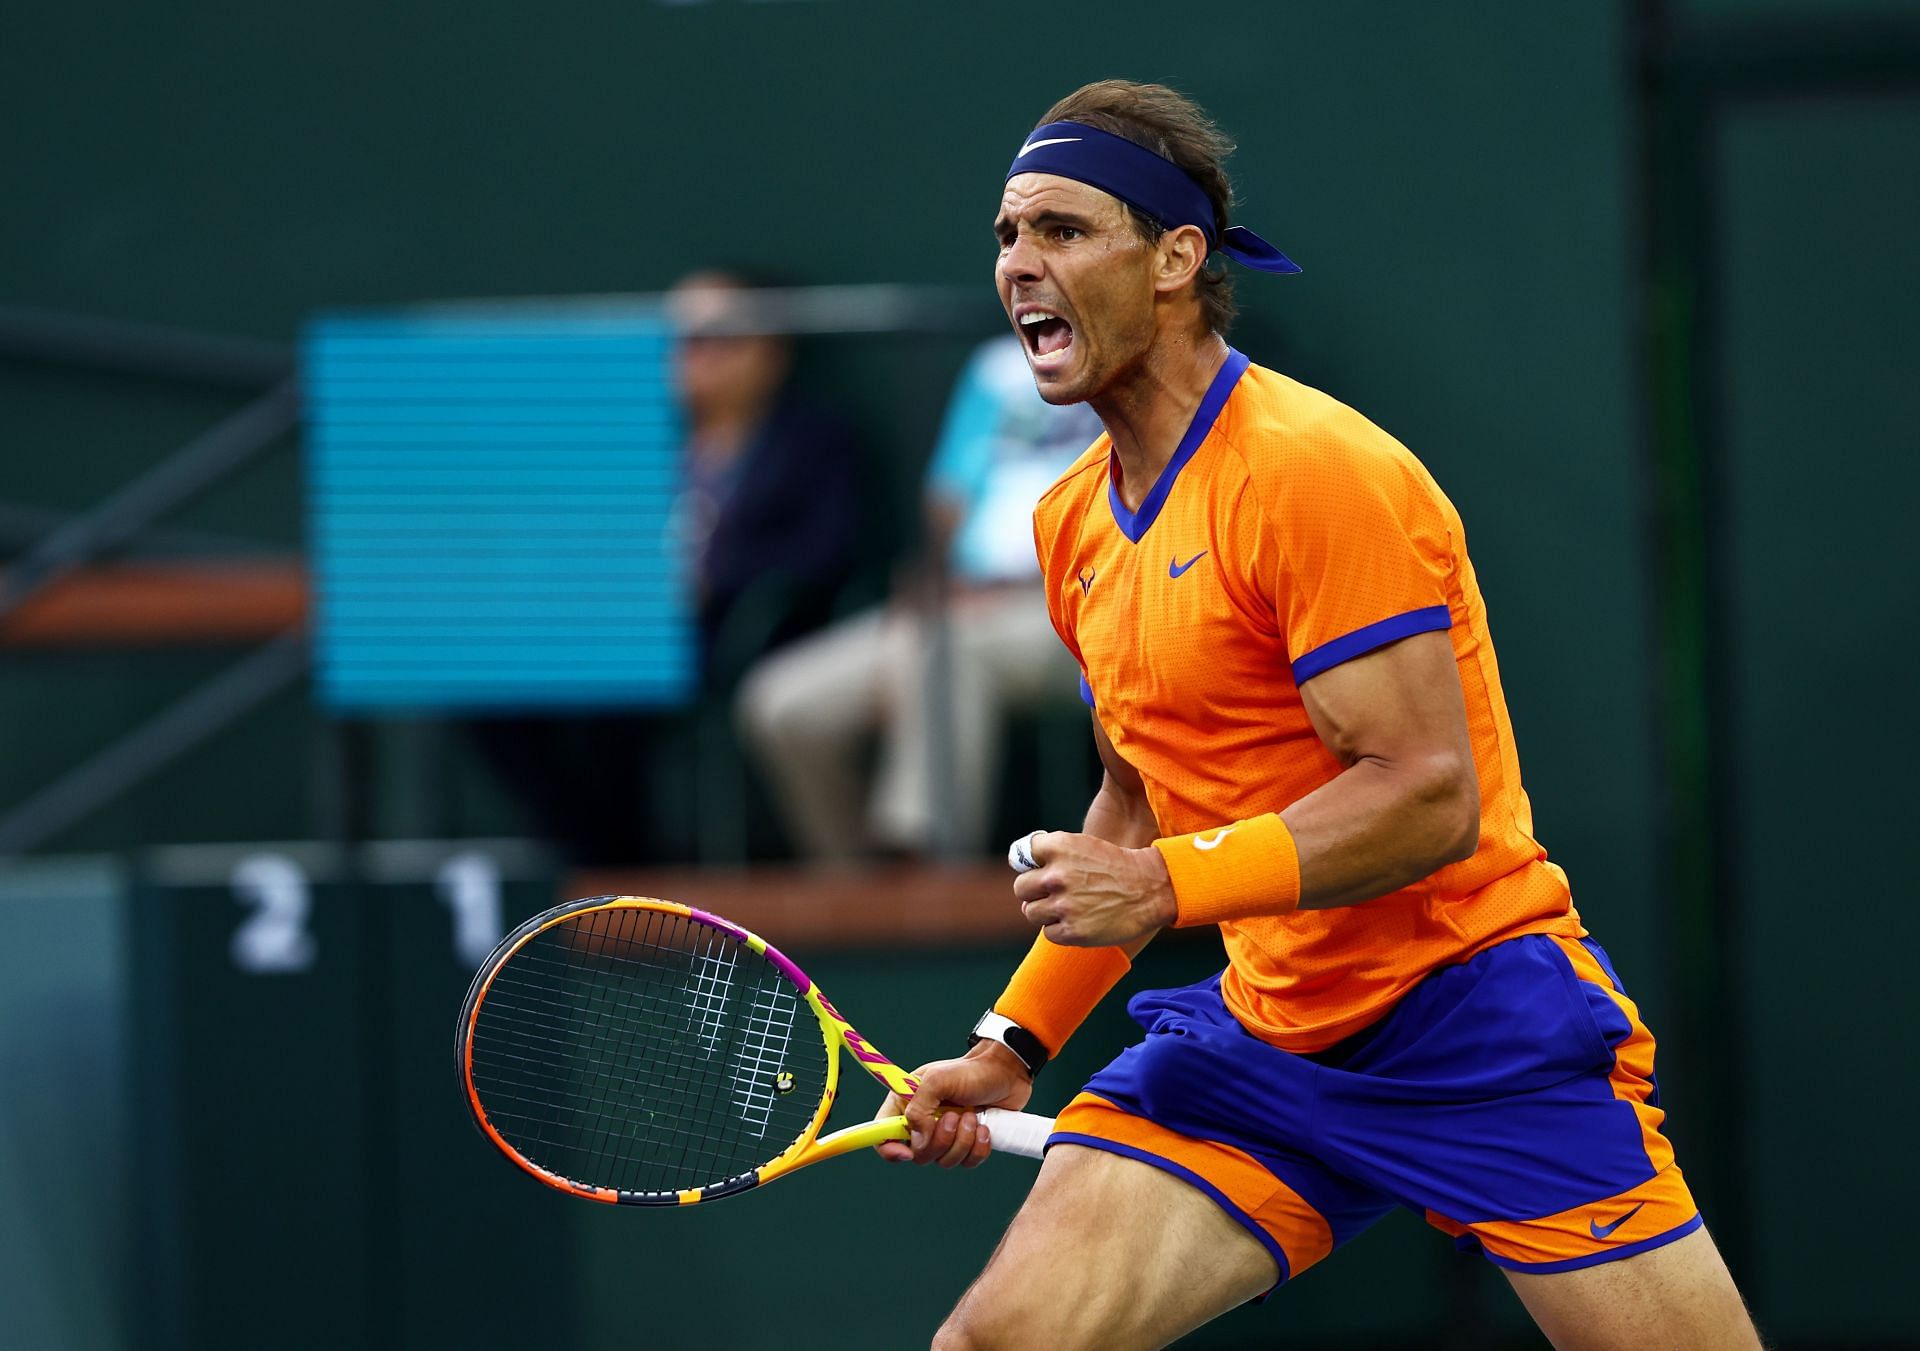 Rafael Nadal reached his fourth final of the year